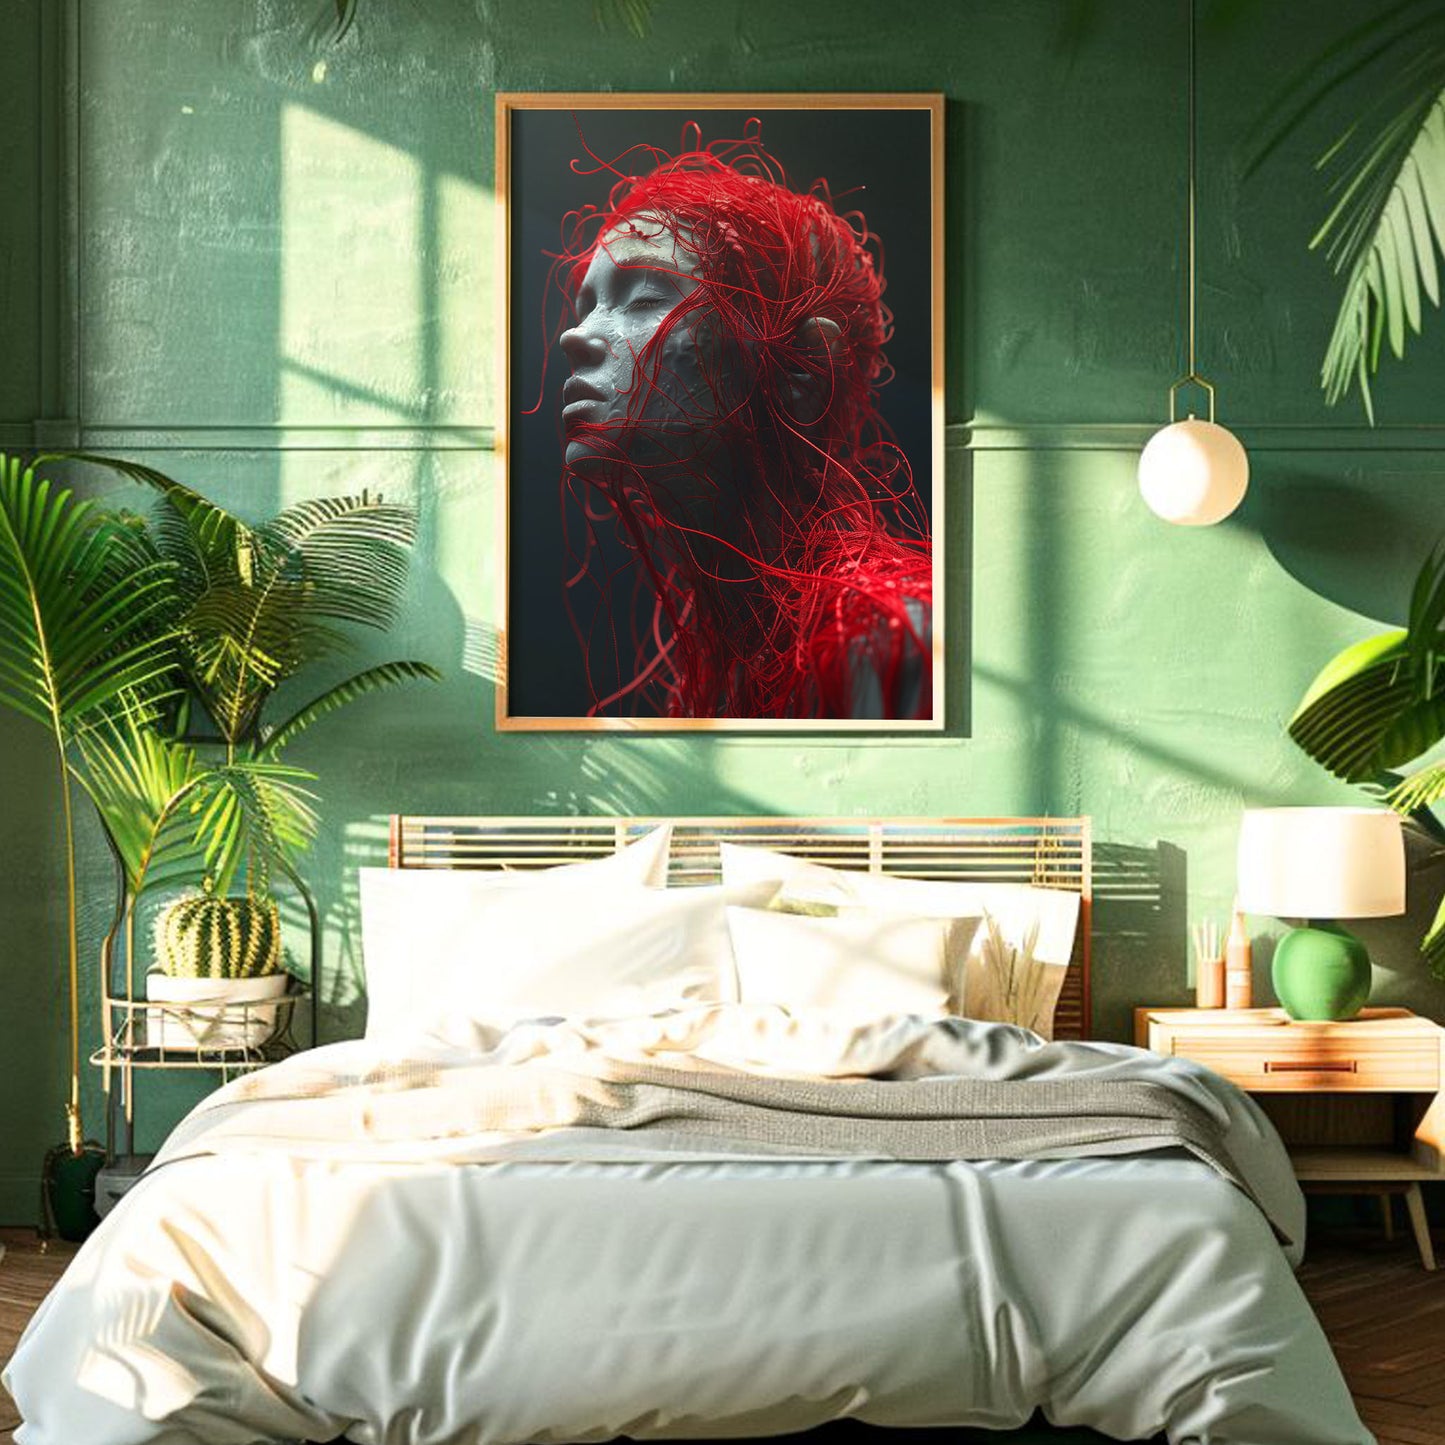 Enigmatic Red Hair Beauty: Translucent Portrait Wall Art Print